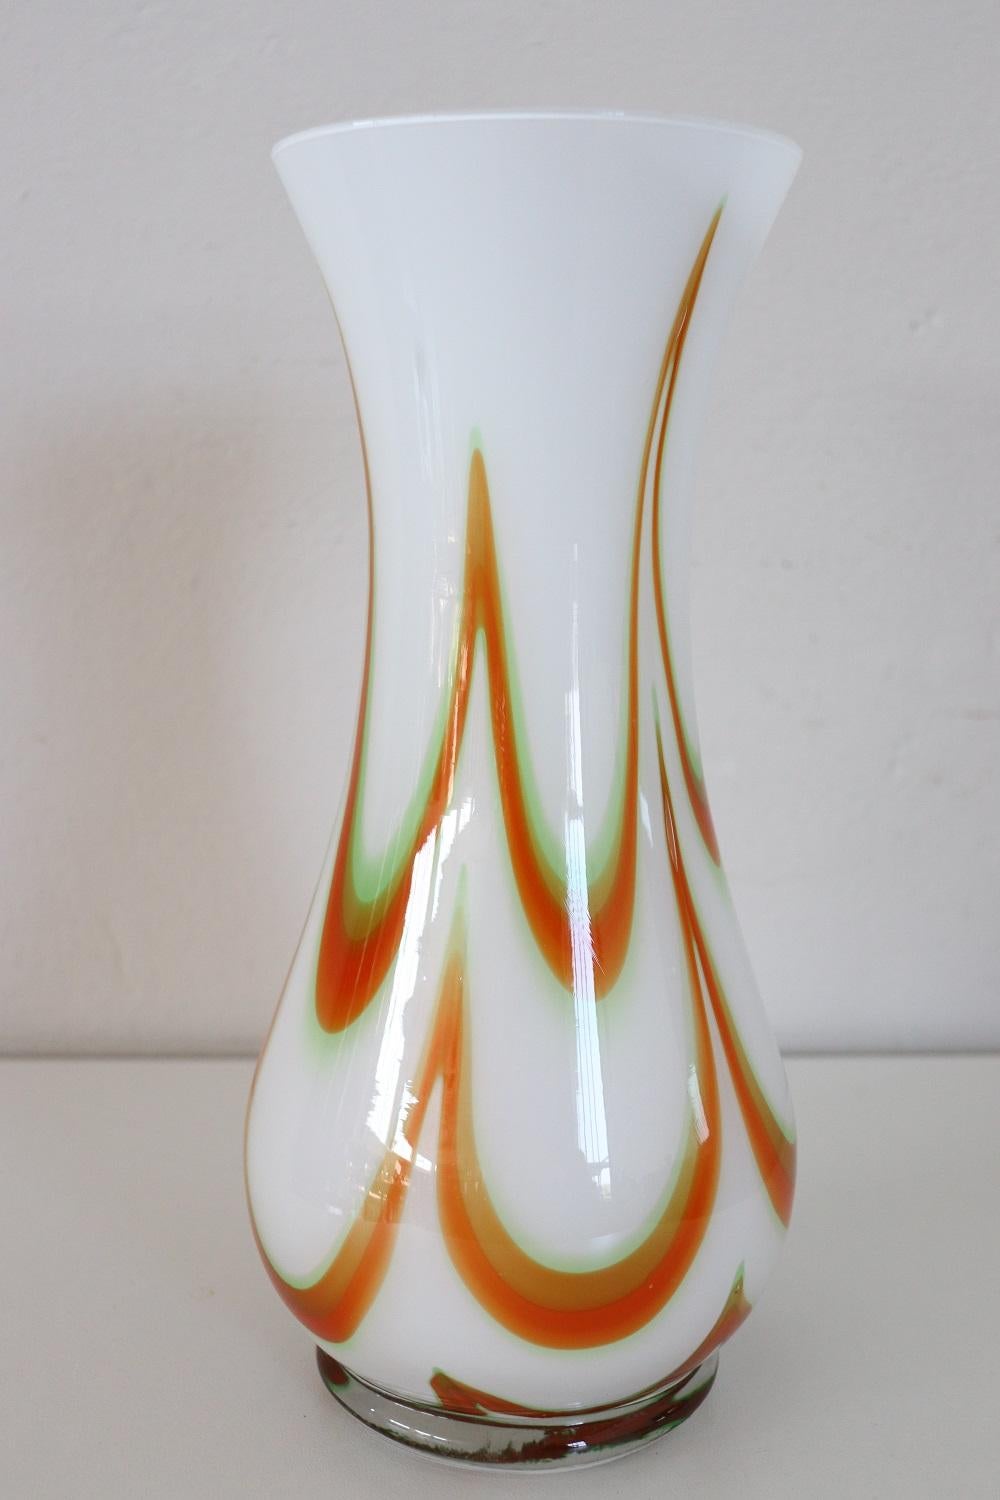 Refined artistic glass vase, Italy, production 1960s Murano. Nicht unterzeichnet. High quality artistic in milky white color with a particular decoration reminiscent of kinetic art in the colors of orange. Perfect for an environment with furnishings